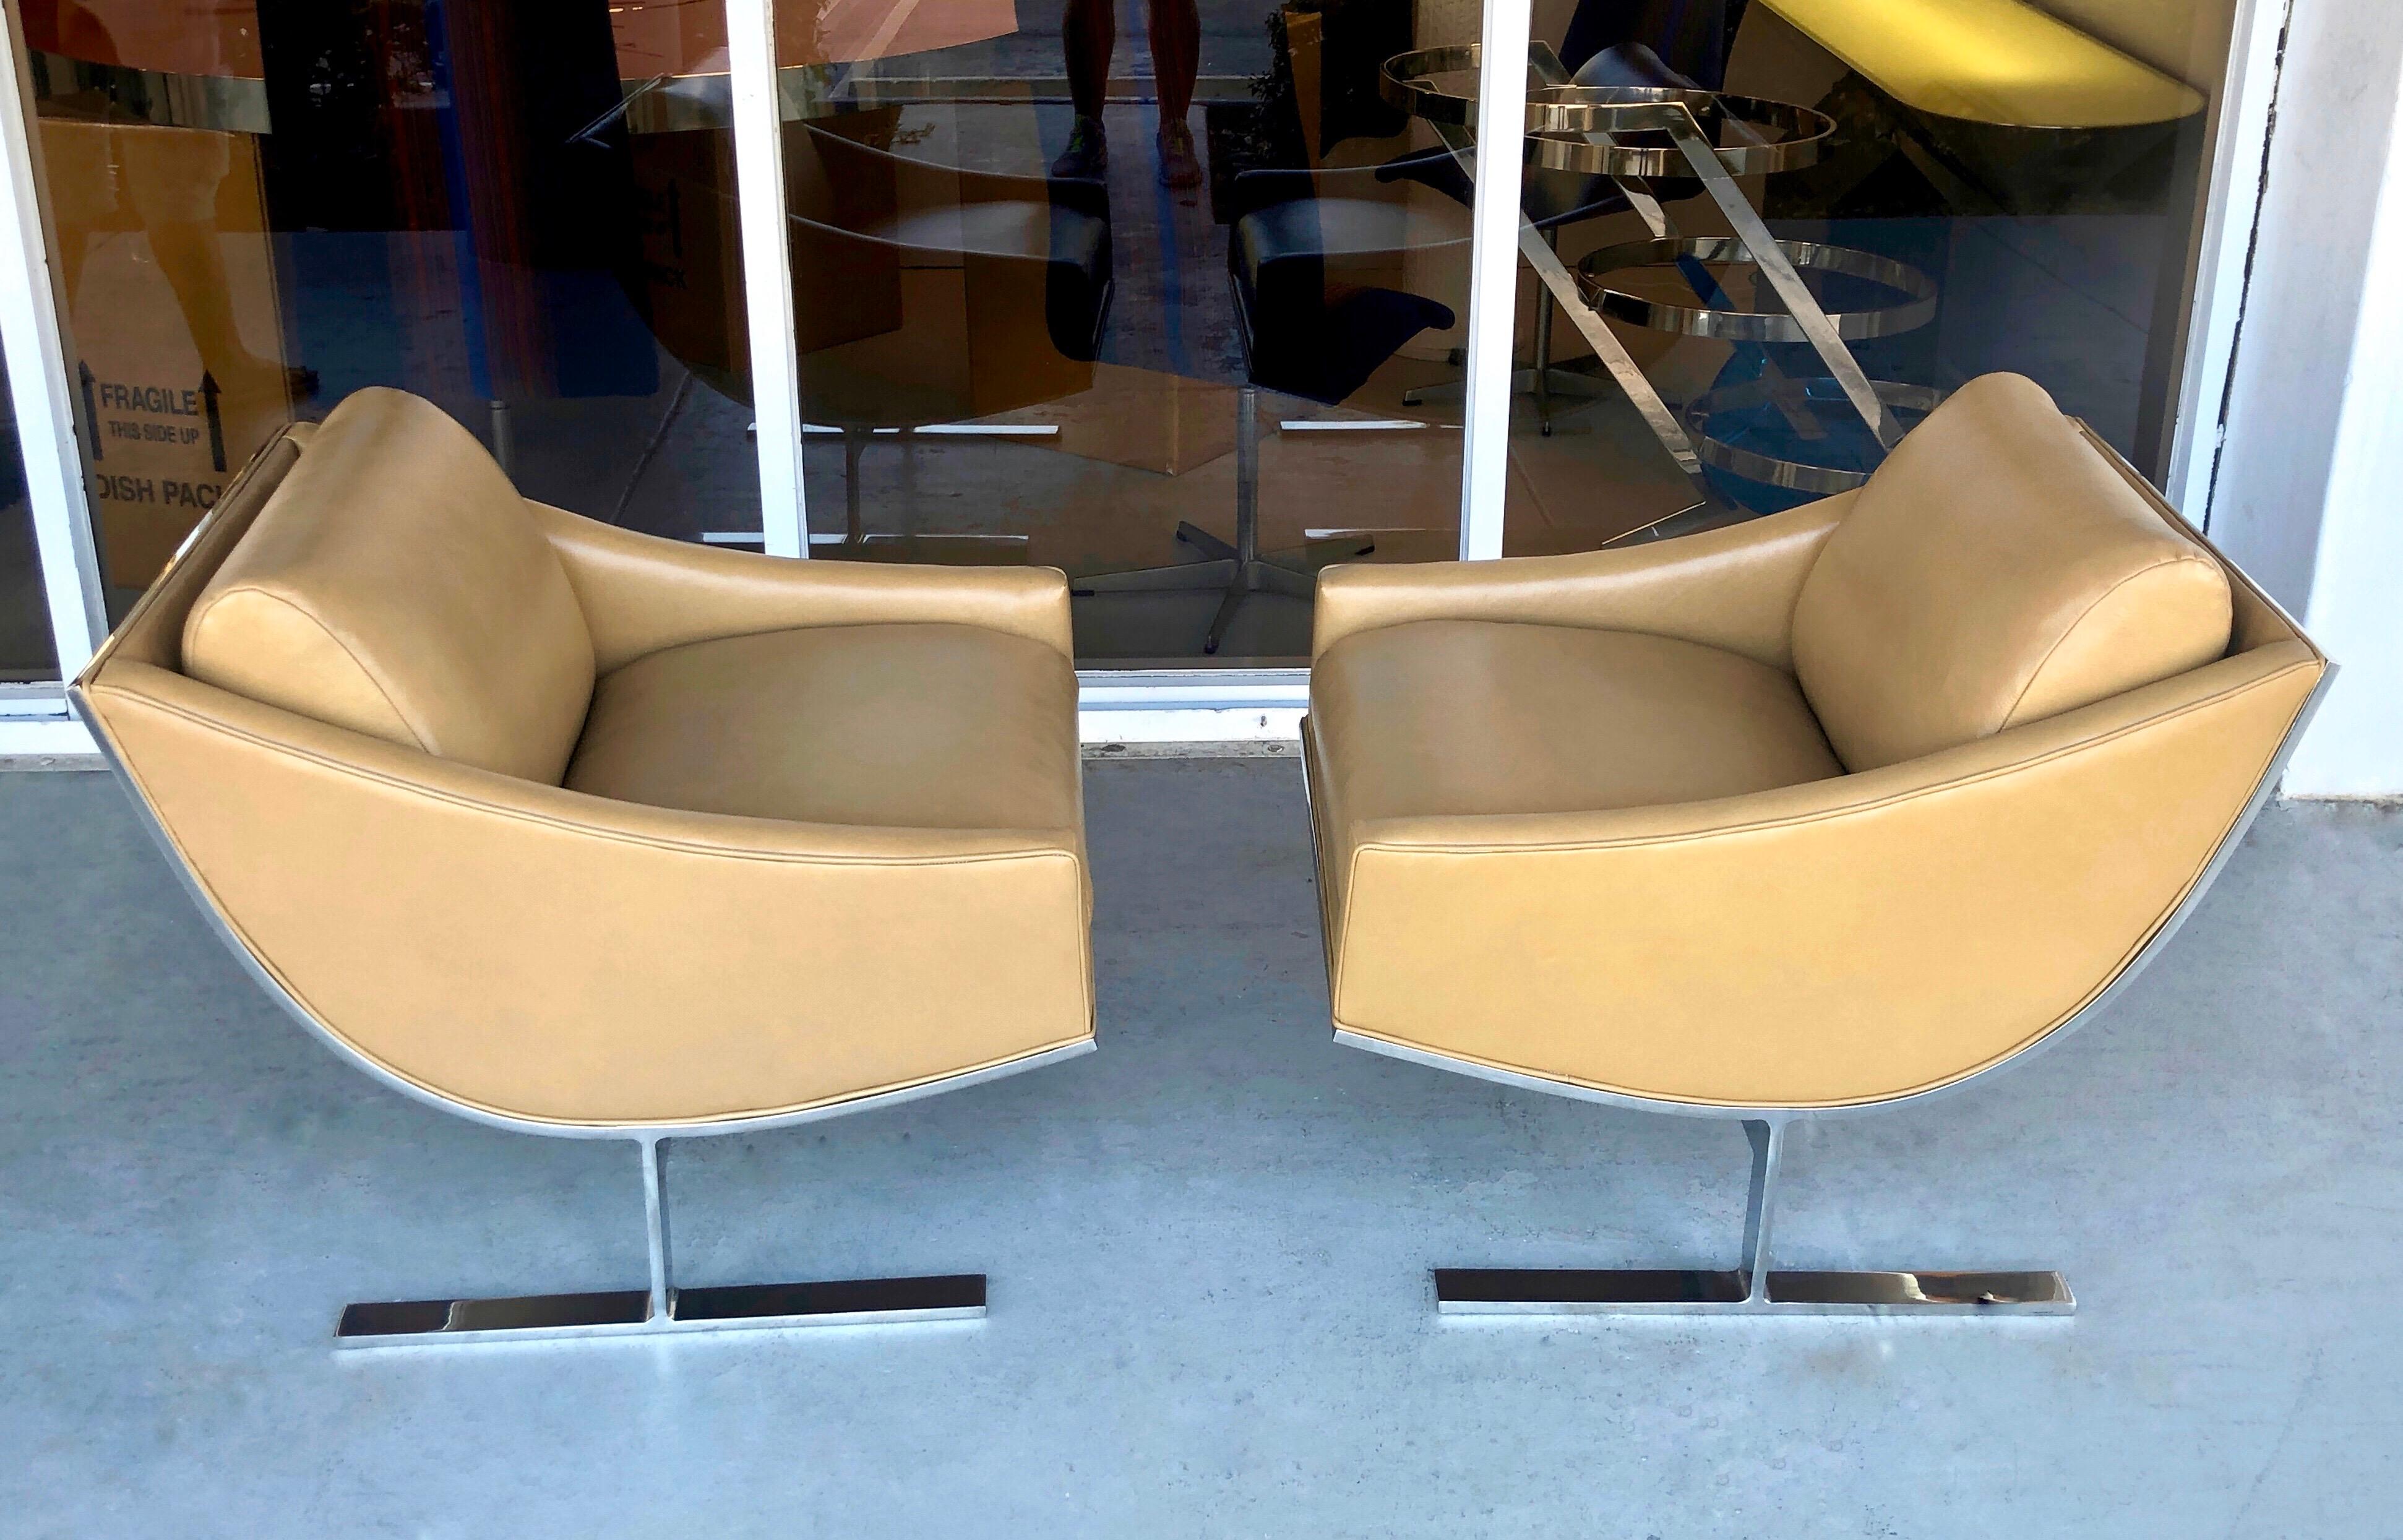 A pair of wonderful chairs by Kipp Stewart for Directional. Solid stainless steel frames with new soft leather upholstery. Super stylish low profile design.